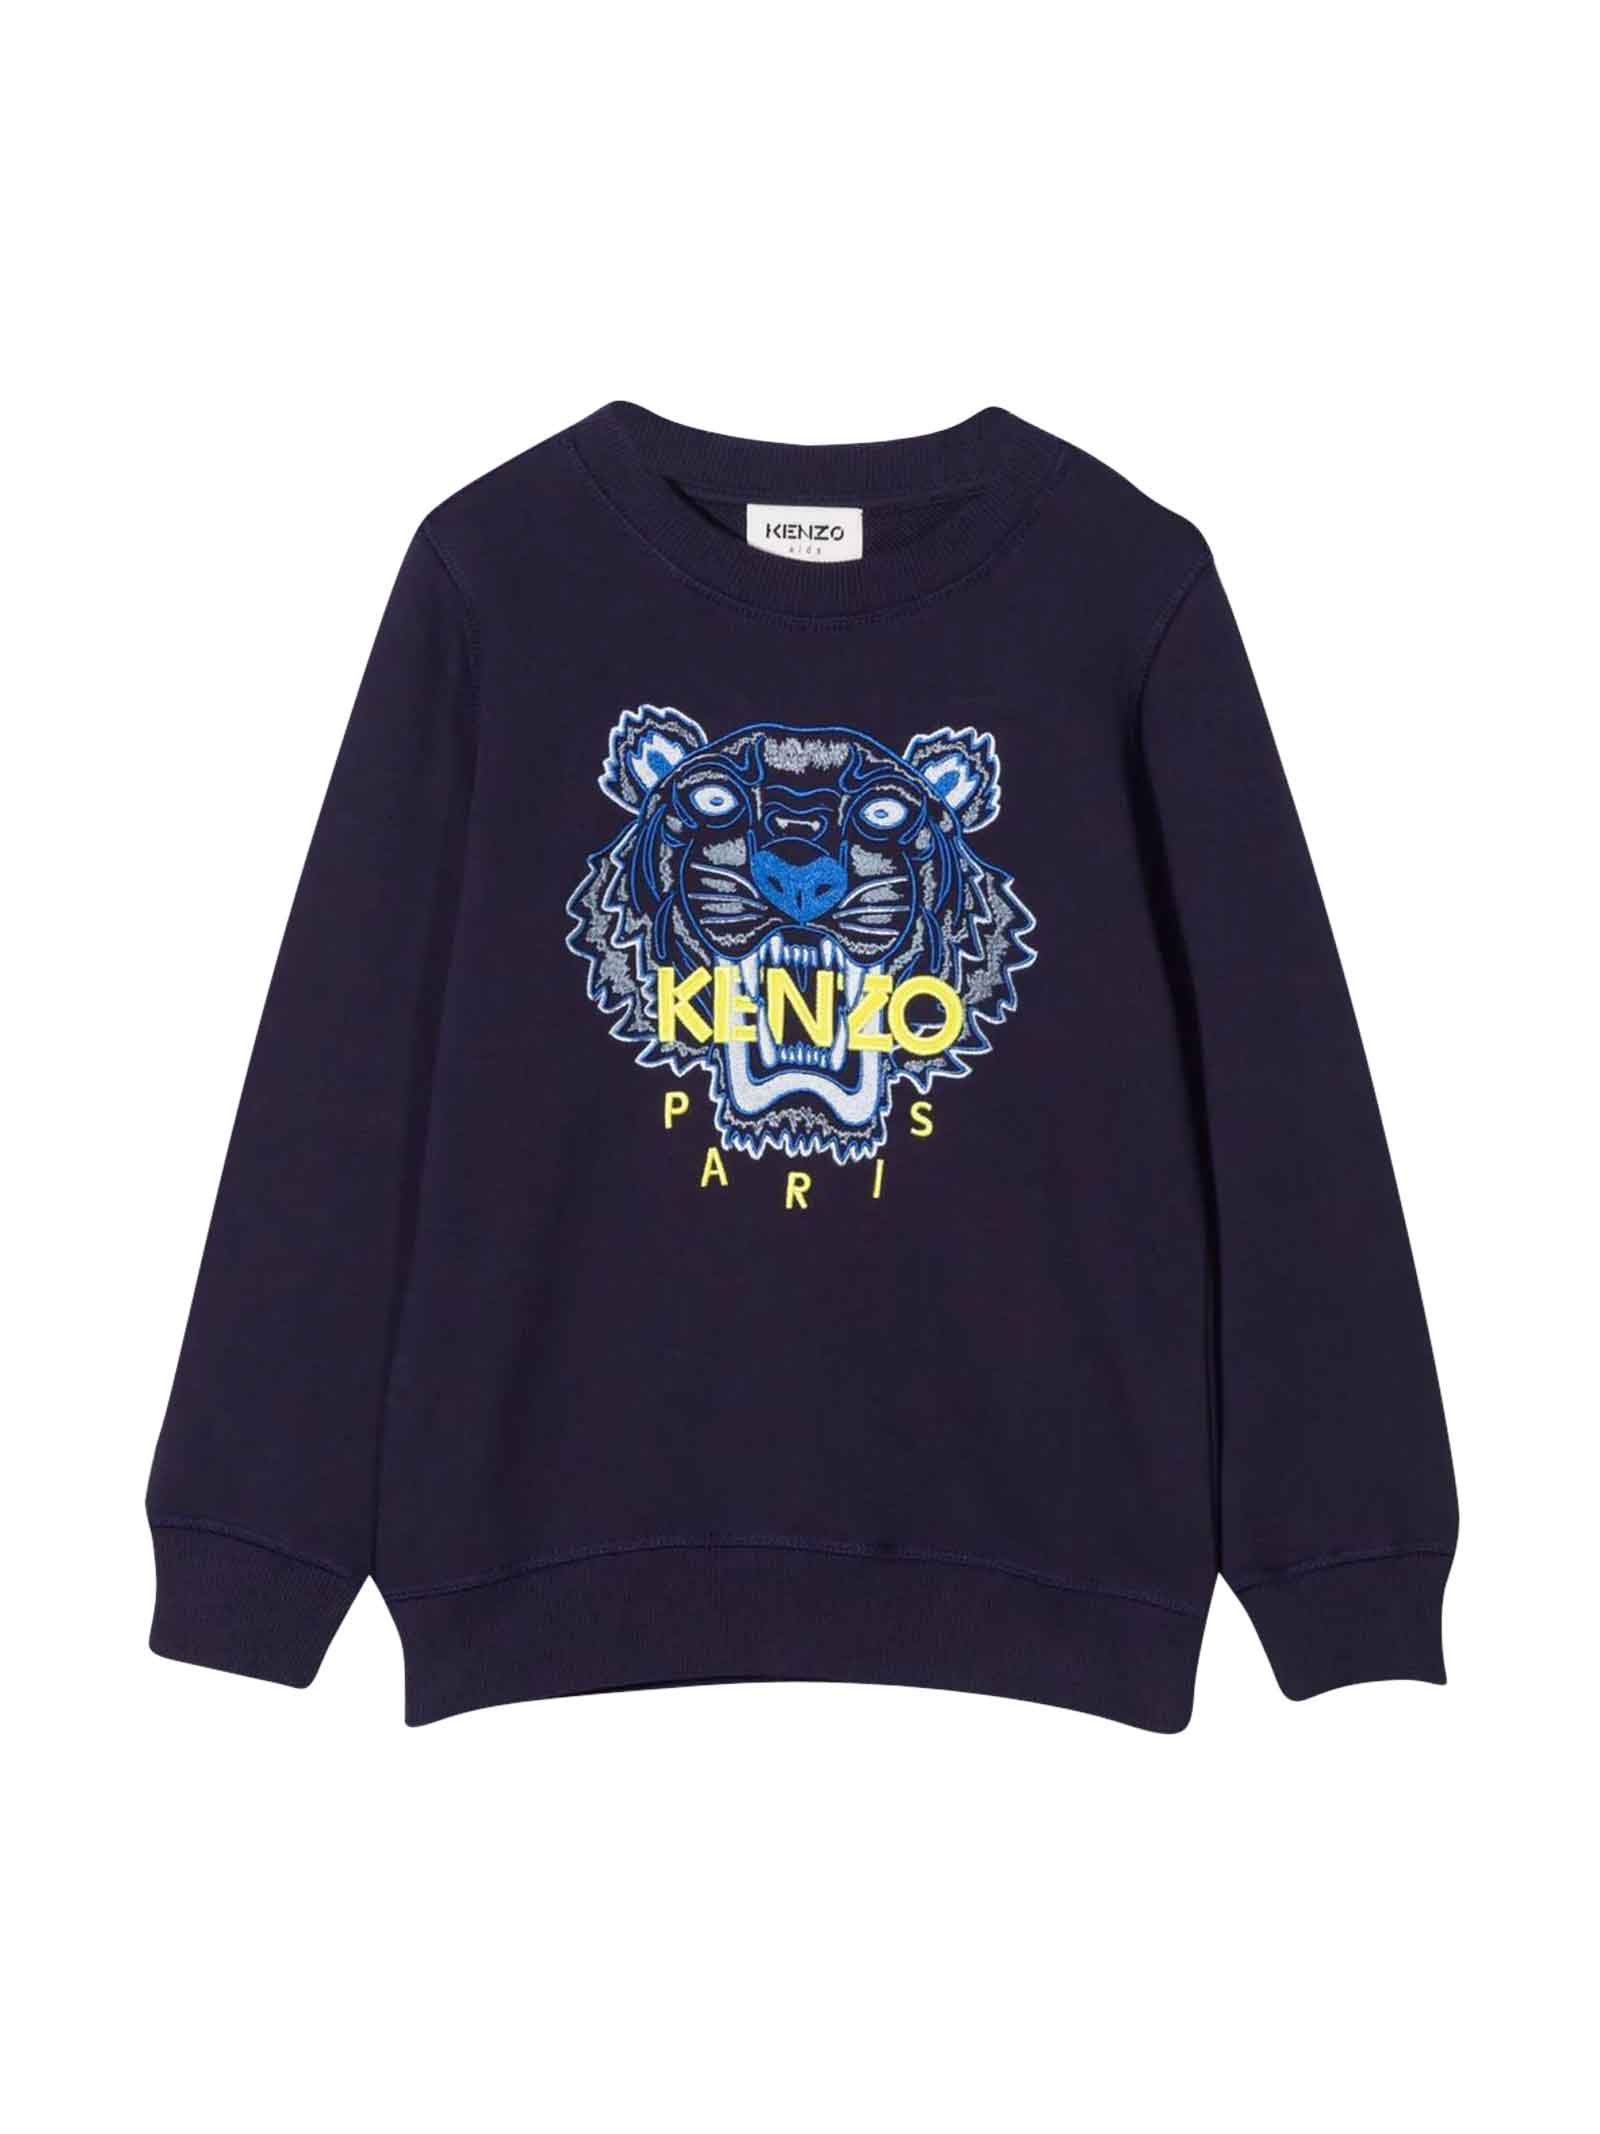 Kenzo Kids Blue Boy Sweatshirt With Front Embroidered Tiger Motif, Crew Neck, Long Sleeves And Straight Hem By.